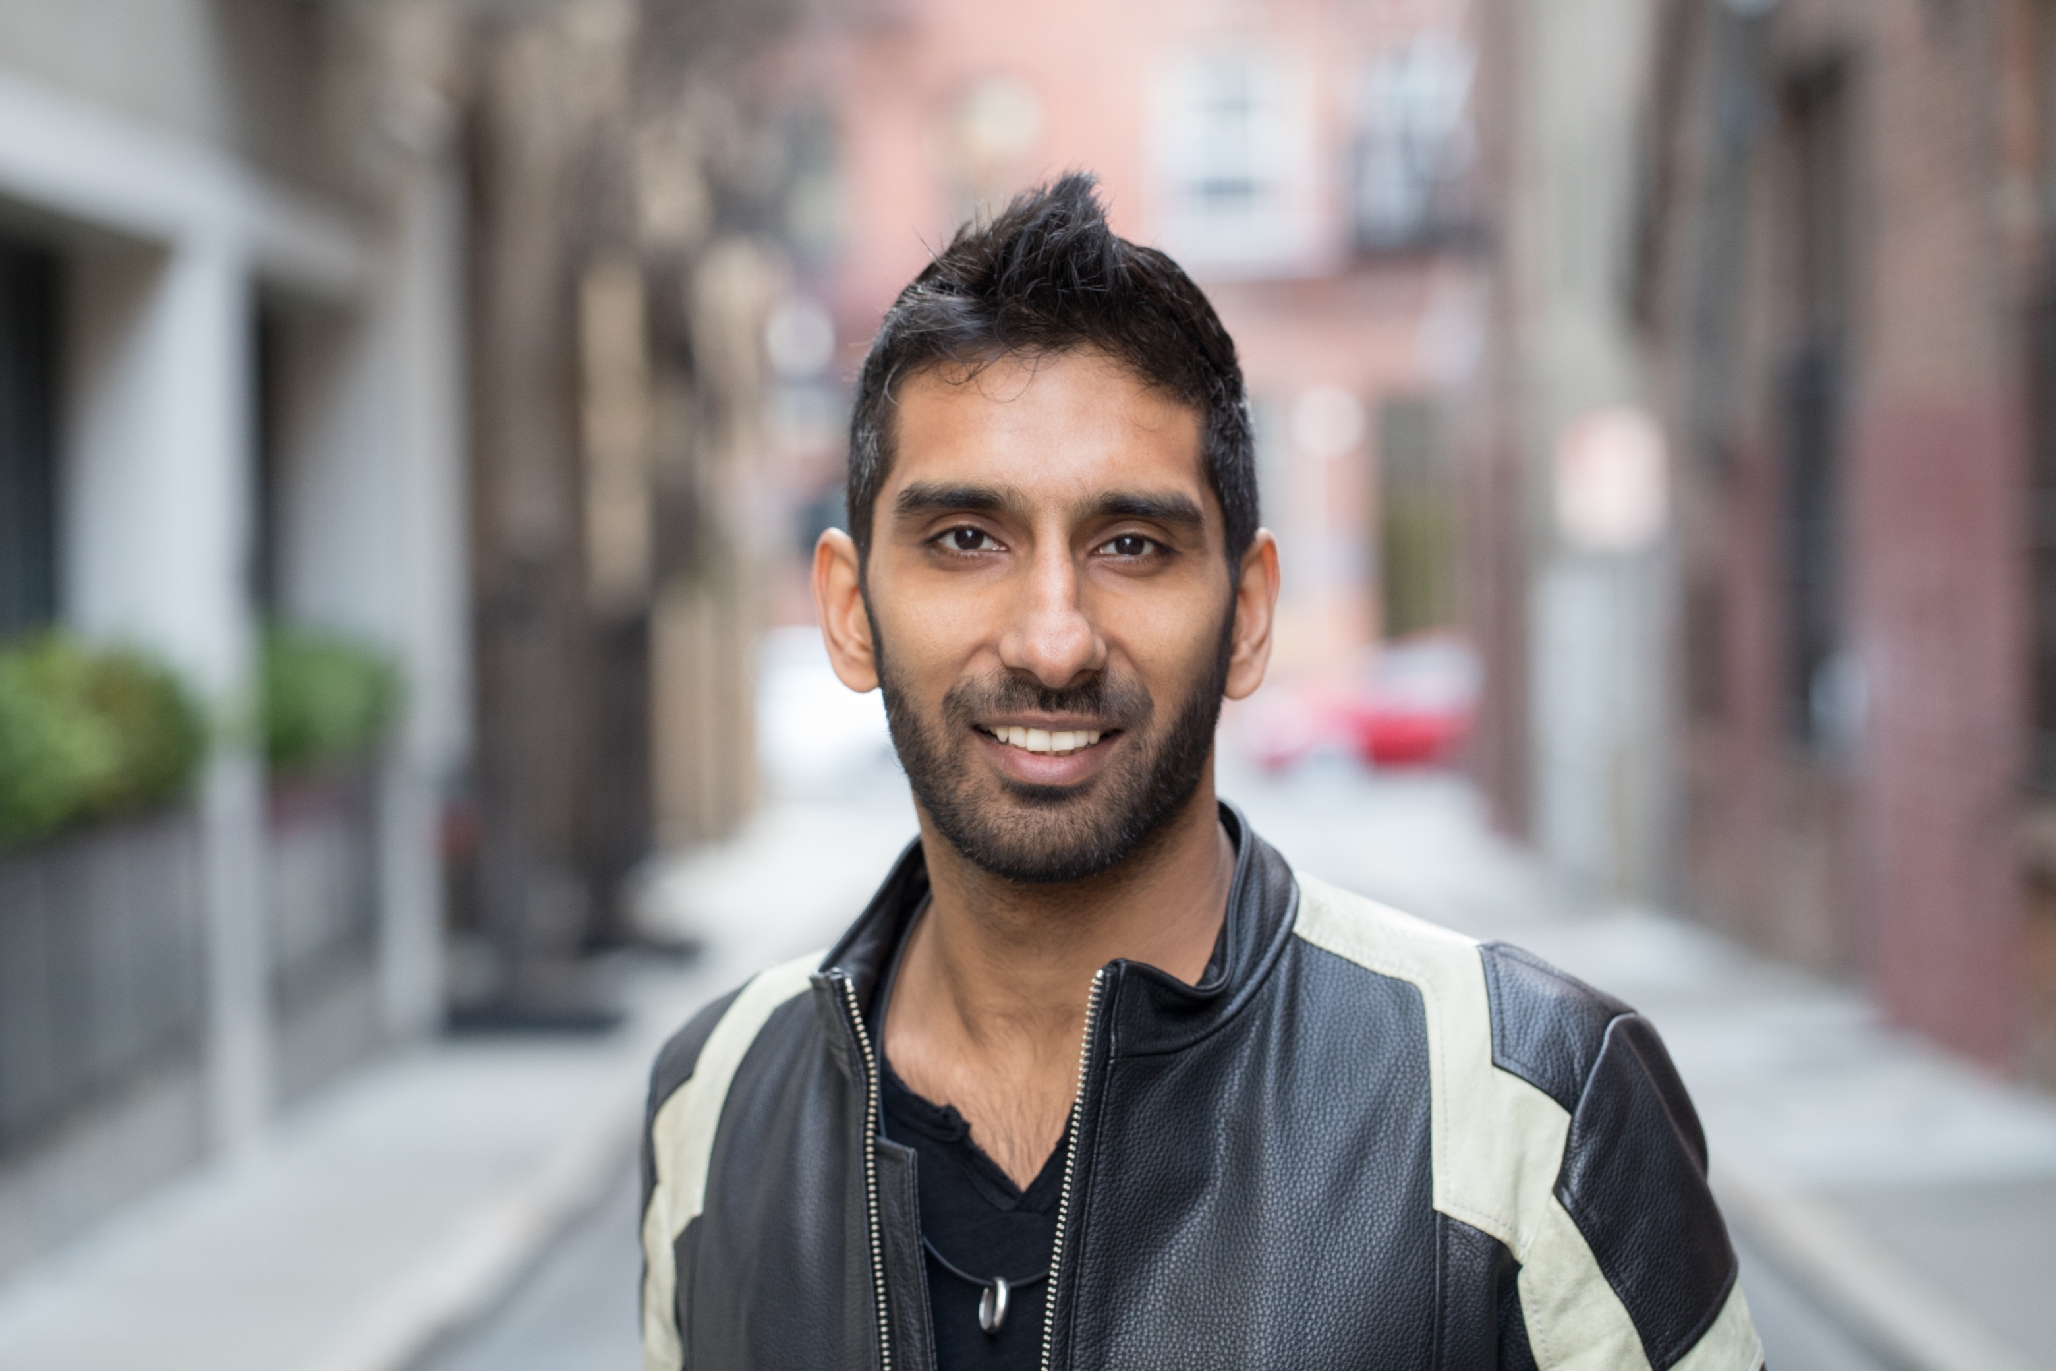 Superhuman founder and CEO Rahul Vohra